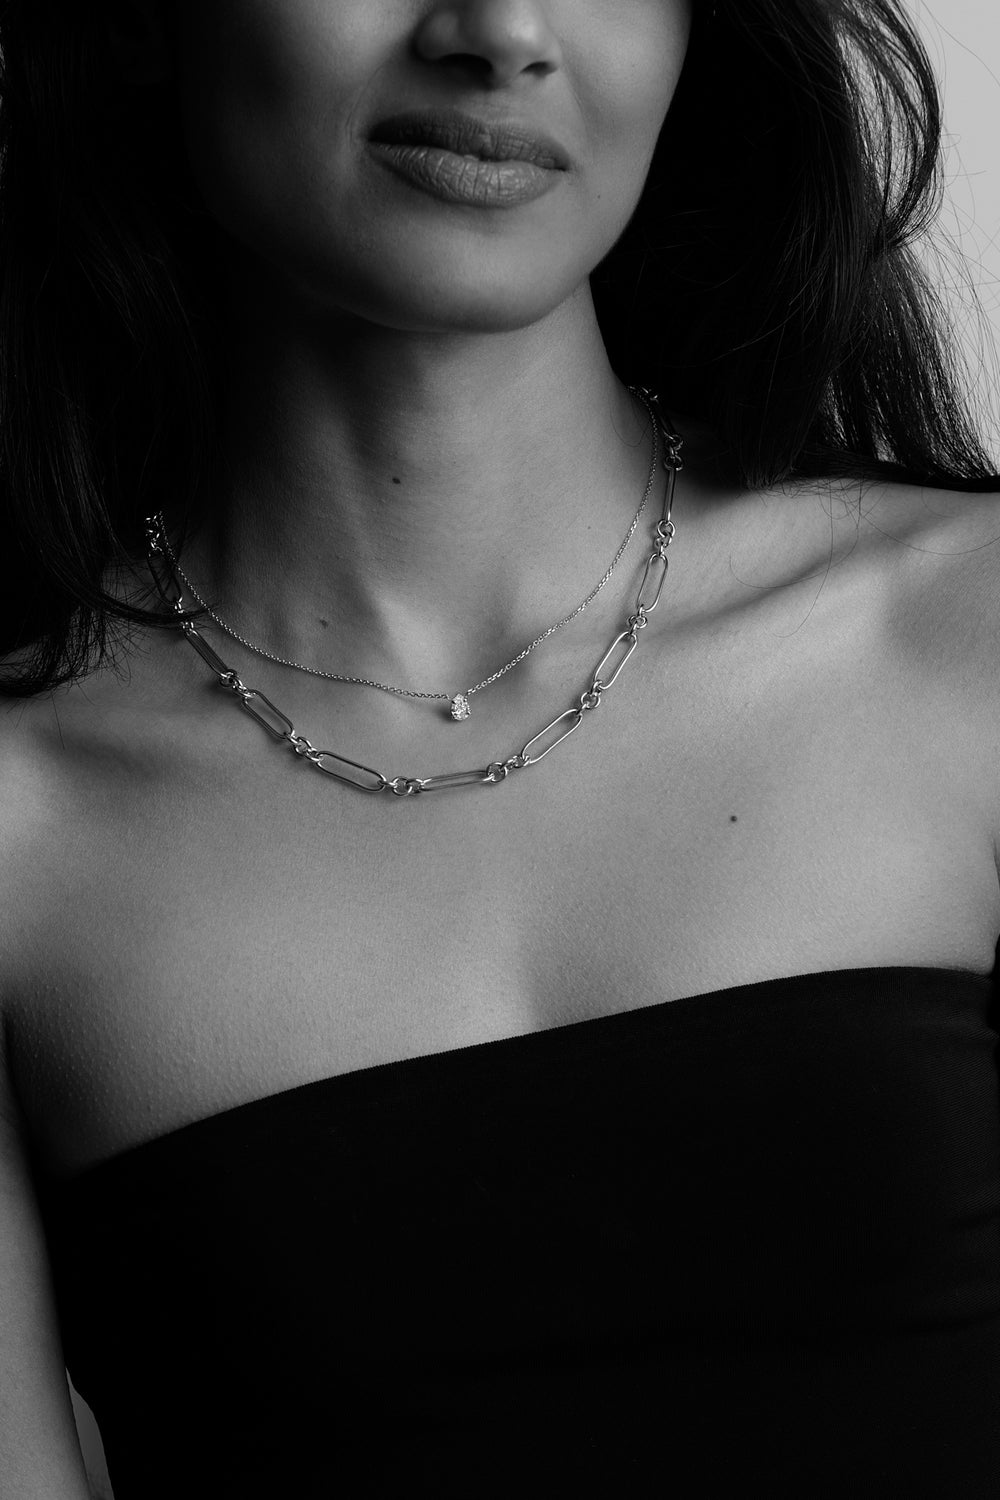 Lennox Necklace | Silver or 9K White Gold, More Options Available| Natasha Schweitzer